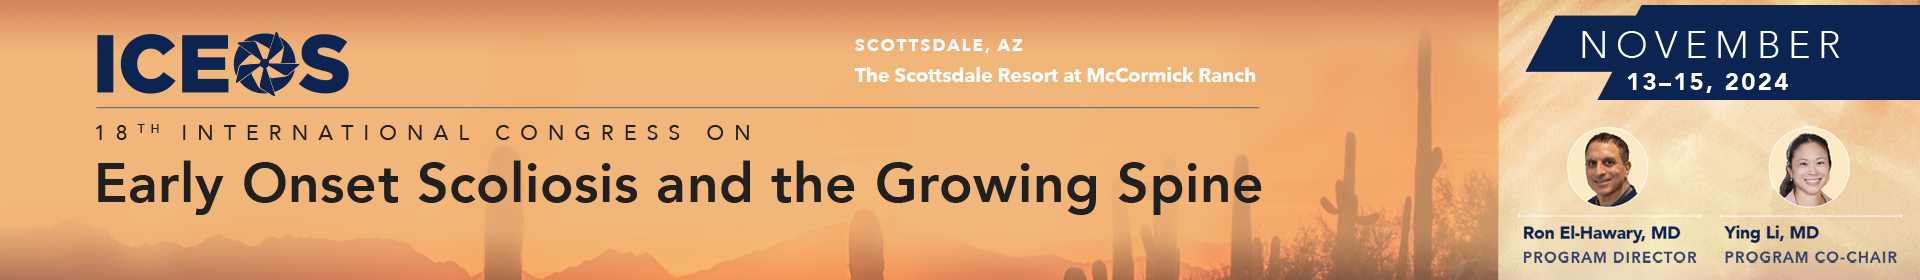 18th International Congress on Early Onset Scoliosis and the Growing Spine | November 13–15, 2023, Scottsdale, Arizona